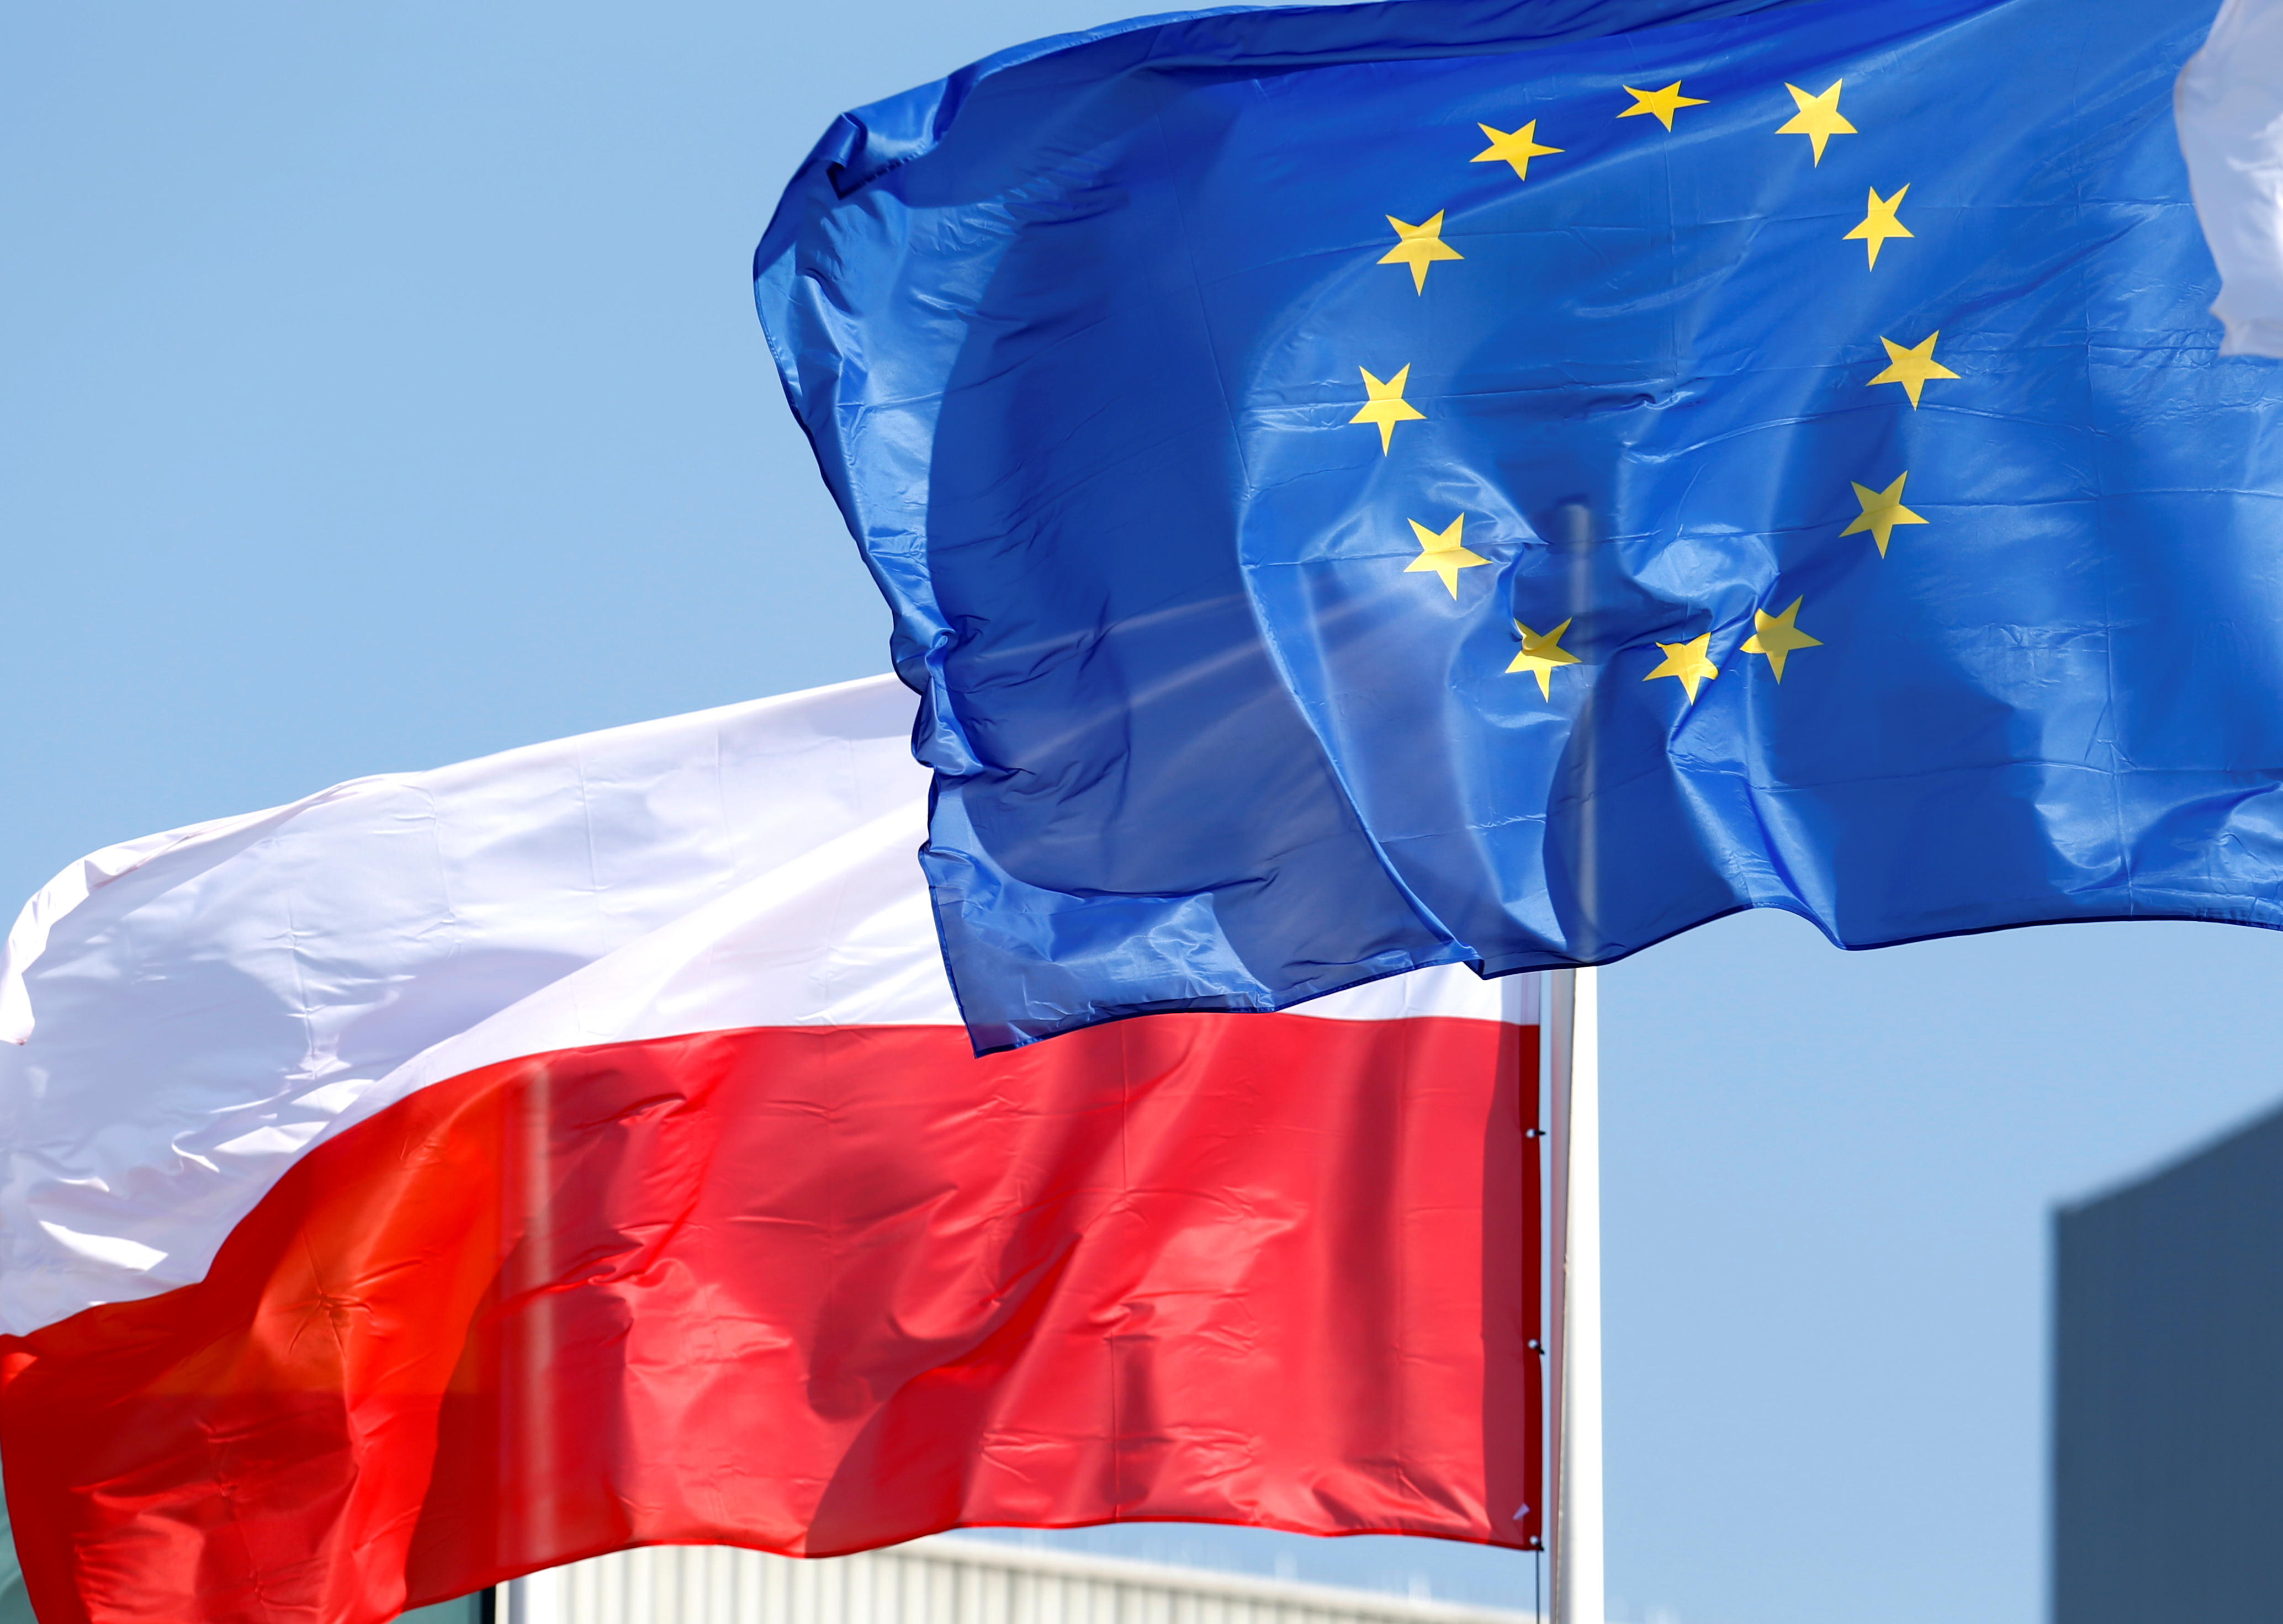 European Union and Poland's flags flutter at the Orlen refinery in Mazeikiai, Lithuania April 5, 2019. REUTERS/Ints Kalnins